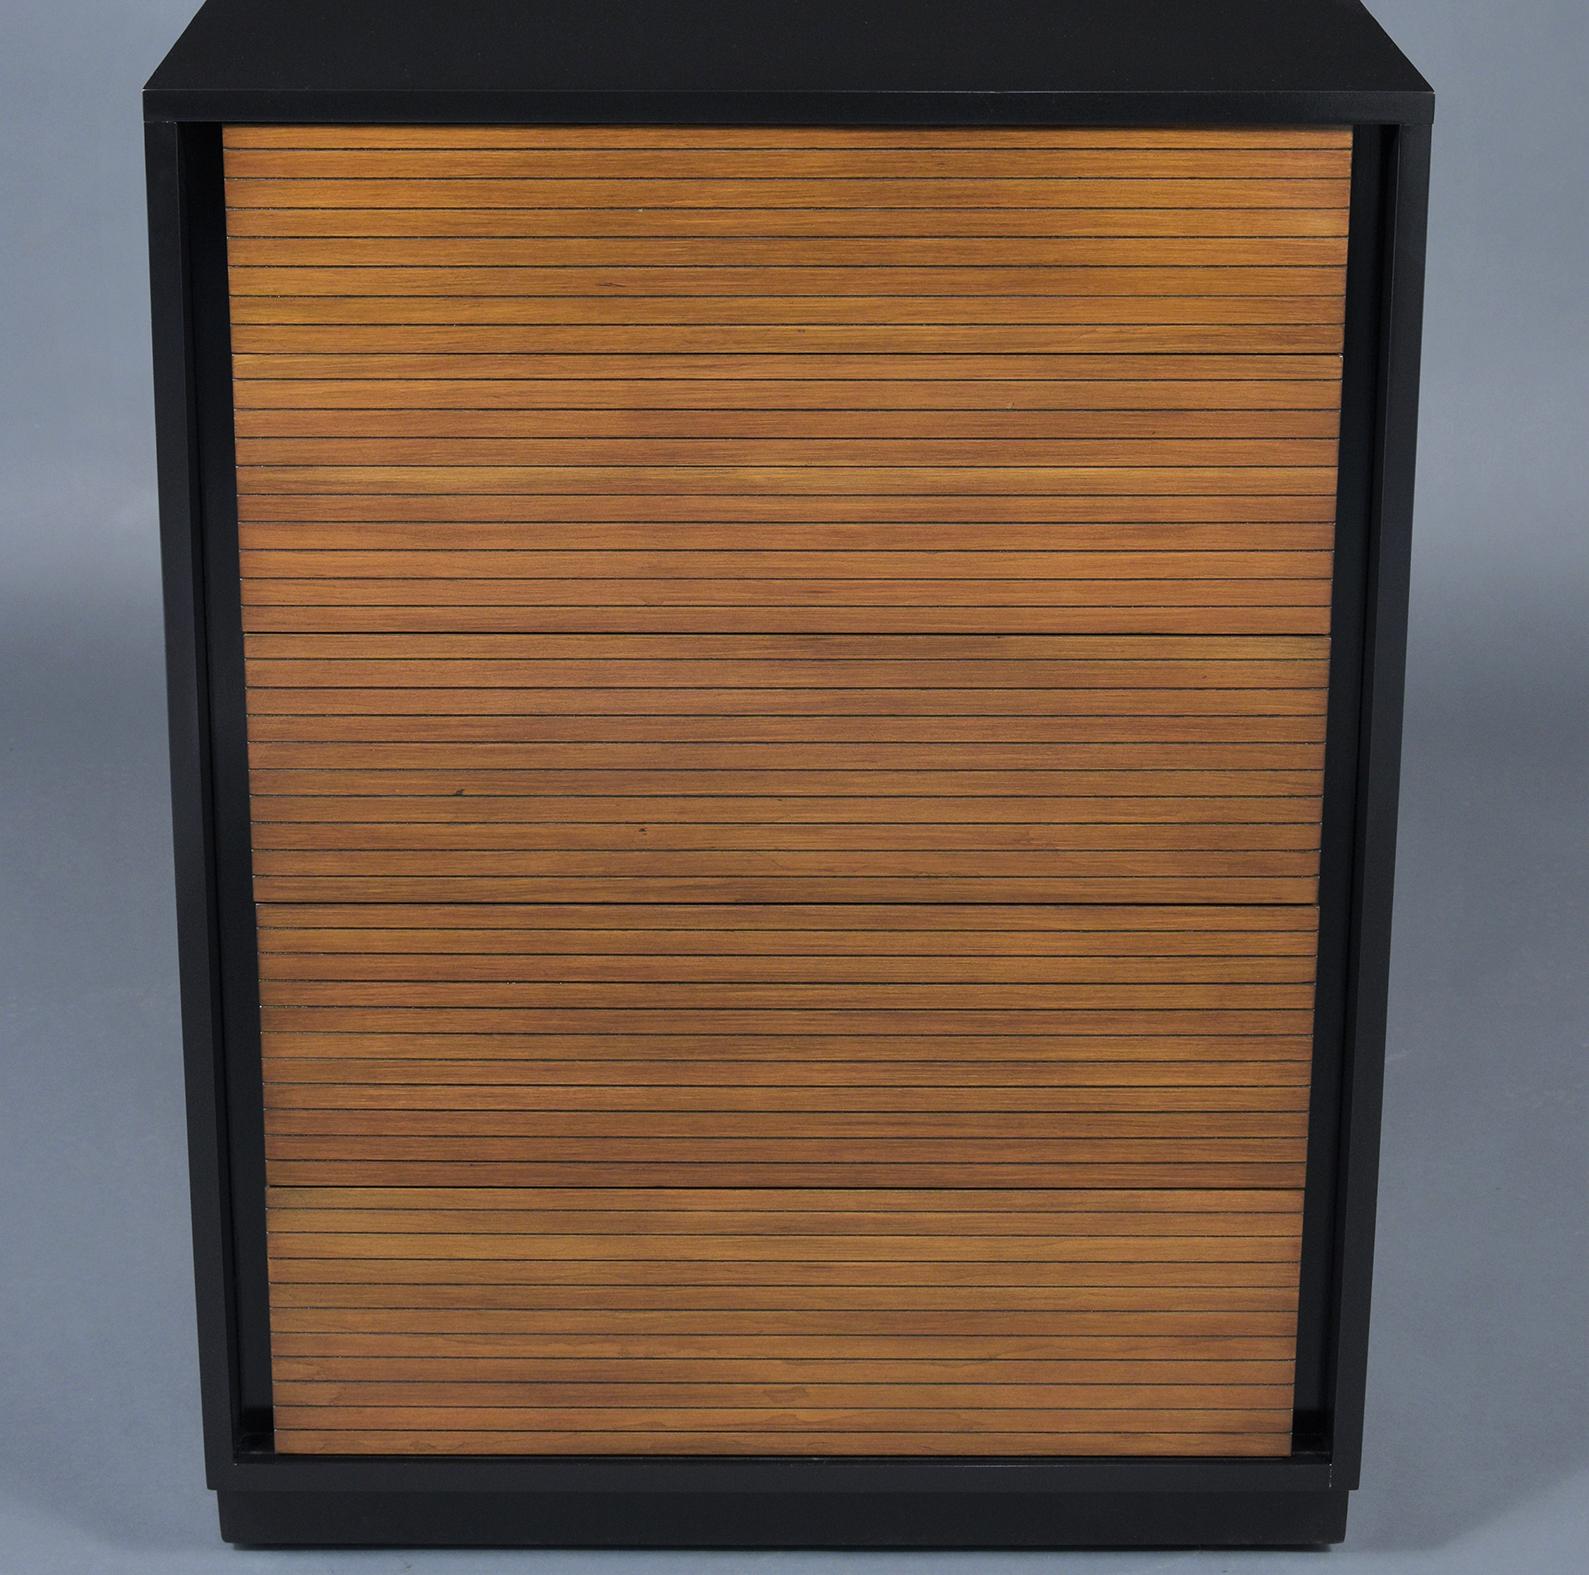 A 1960s mid-century modern walnut chest of drawers handcrafted out of mahogany wood and has been professionally restored by our team of expert craftsmen. This dresser is stained in an ebonized & walnut combination color with a newly lacquered finish